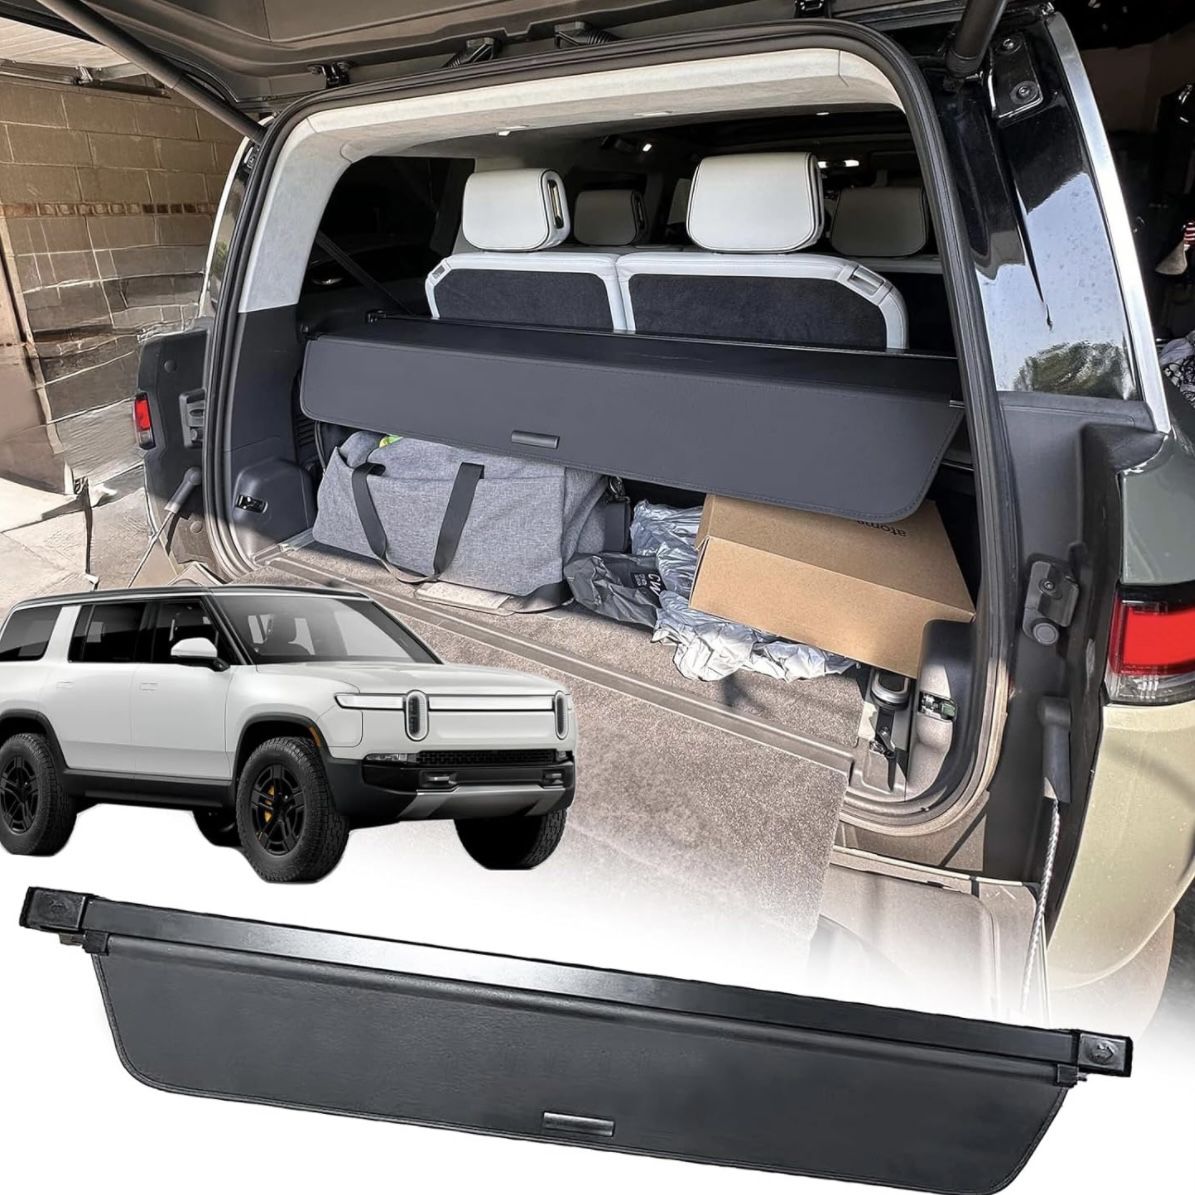 Volcaner Cargo Cover for Rivian R1S Accessories, Retractable Cargo Cover Privacy Security Screen